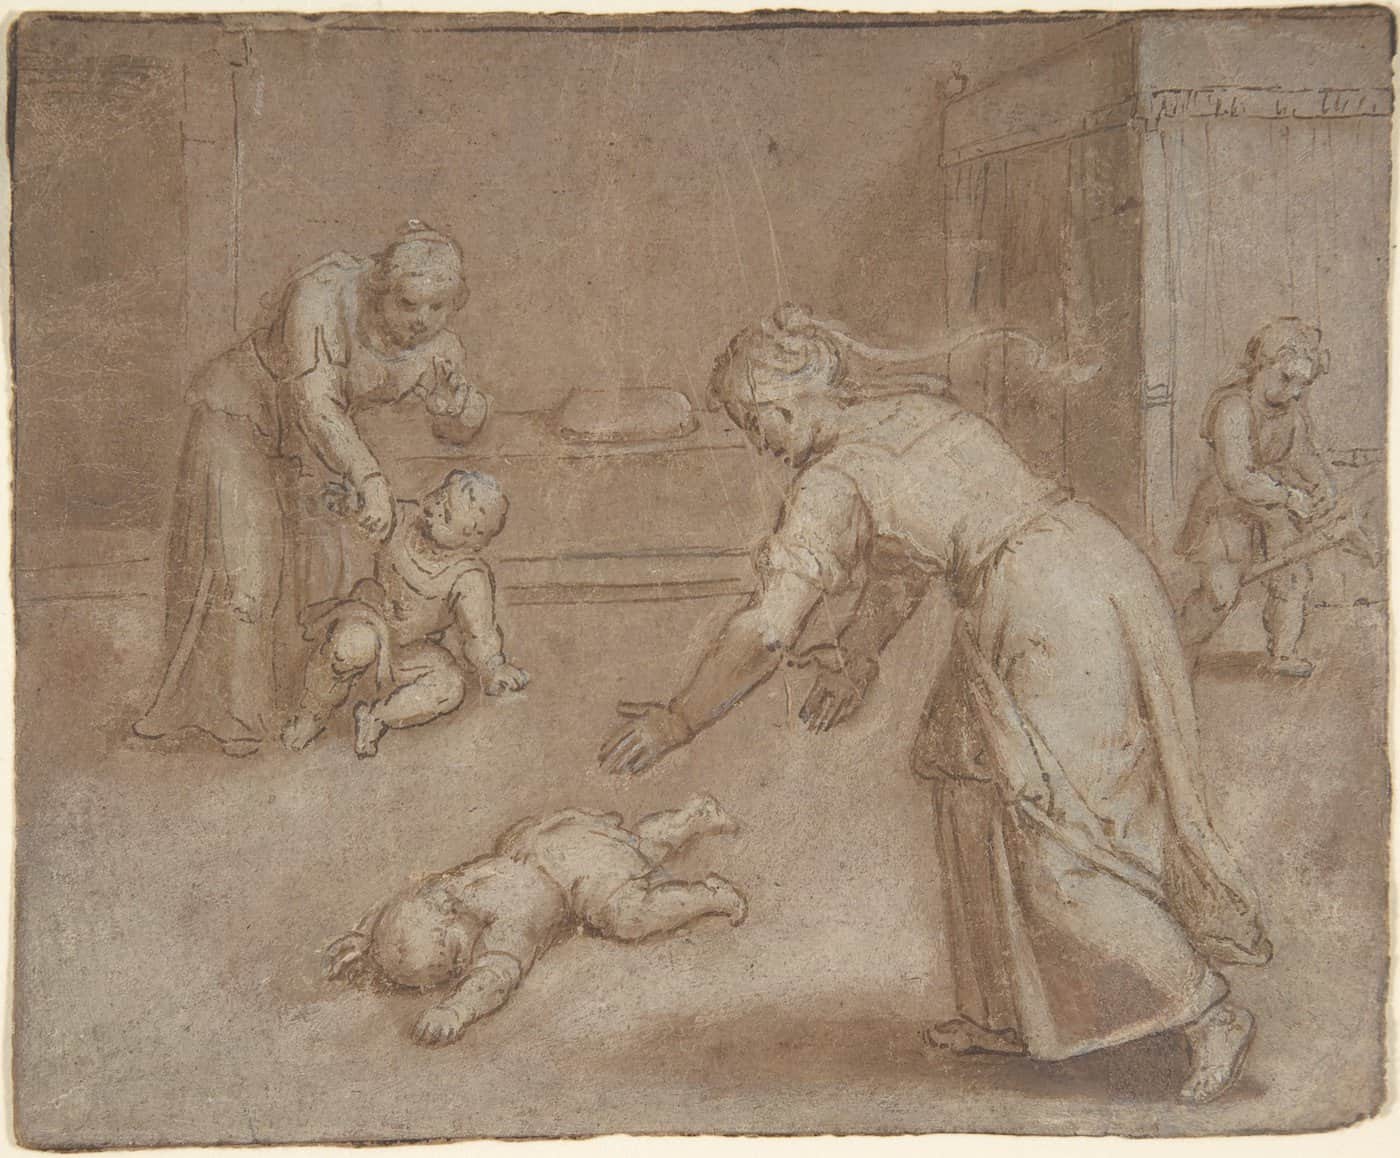 Two women and three children in an interior, 1556–1629, Otto van Veen, The Metropolitan Museum of Art (article on social-emotional learning)